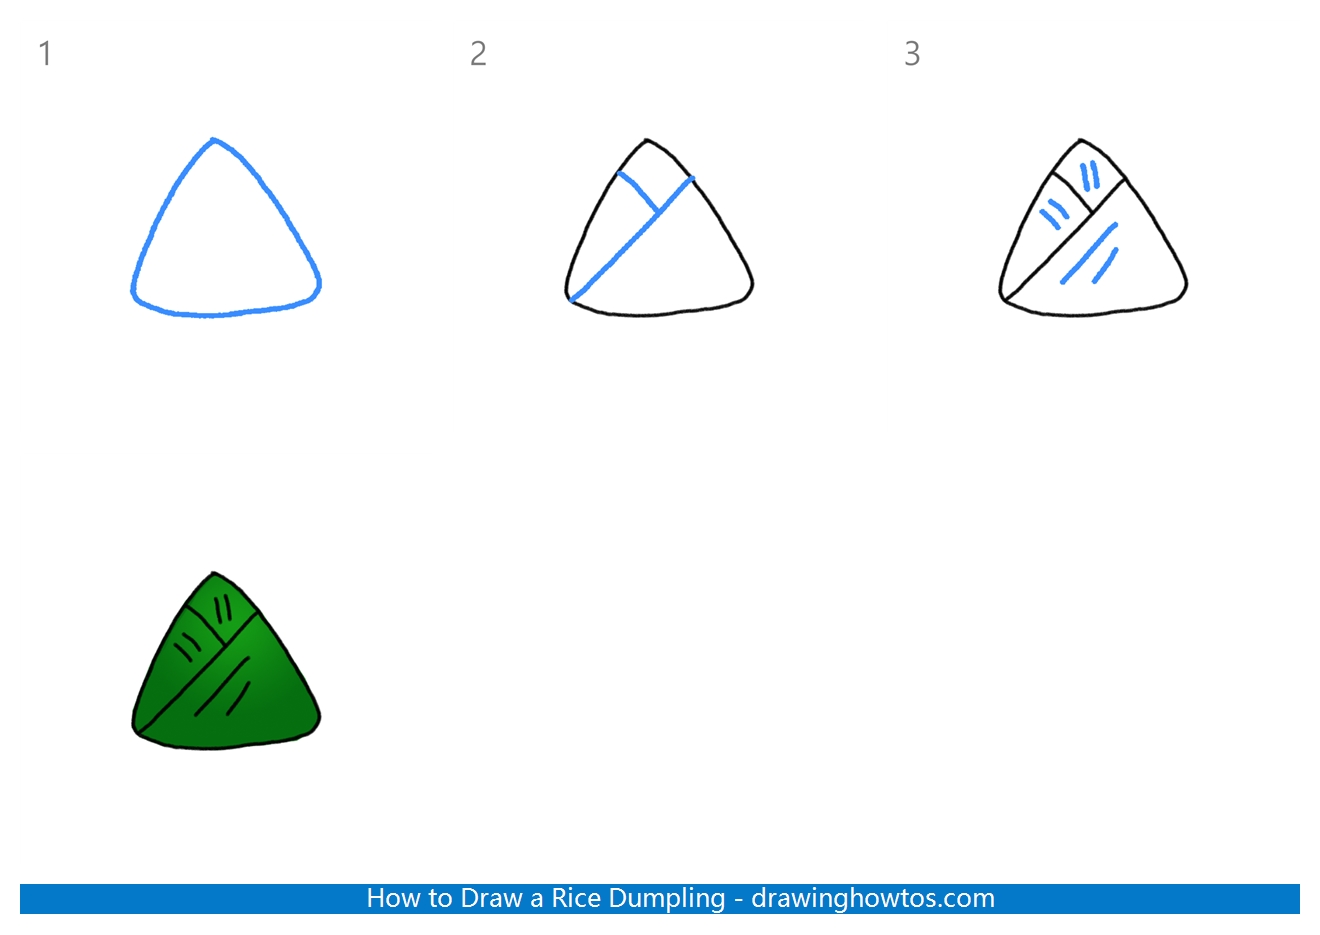 How to Draw a Rice Dumpling Step by Step